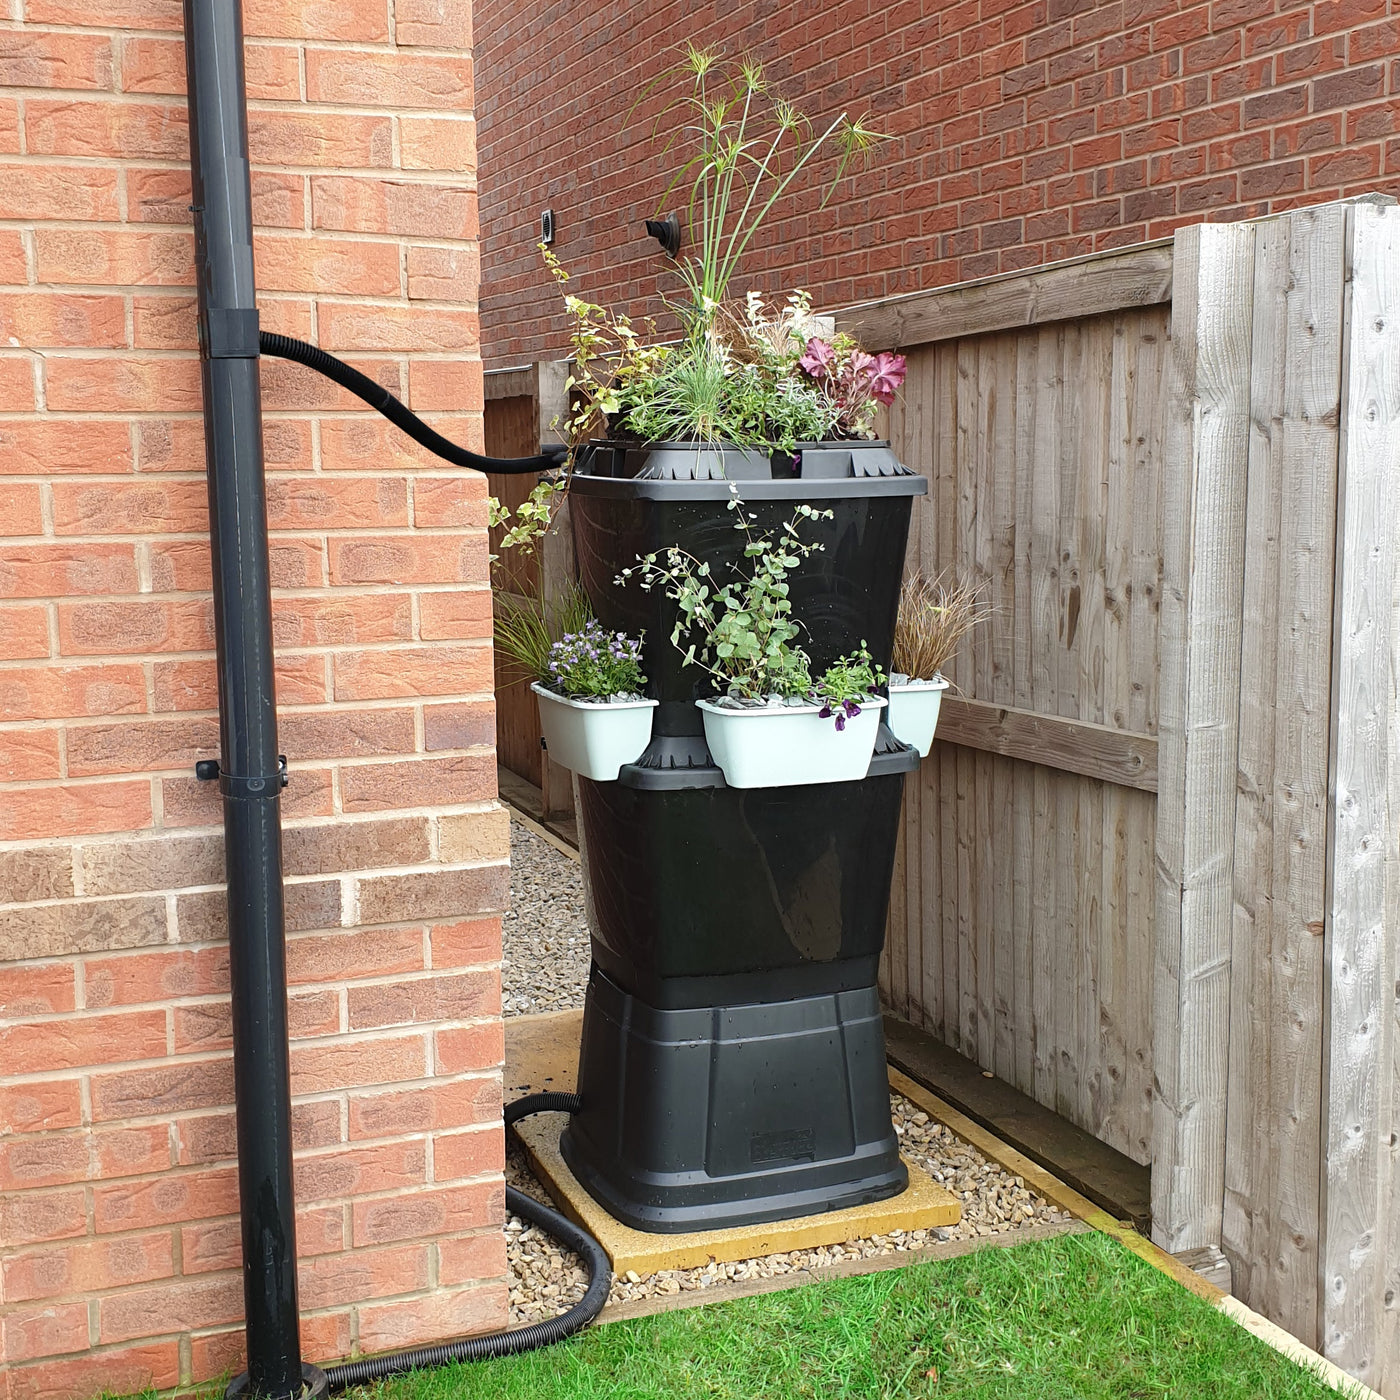 black water butt with duck egg blue planters connected to downpipe on red brick new build house